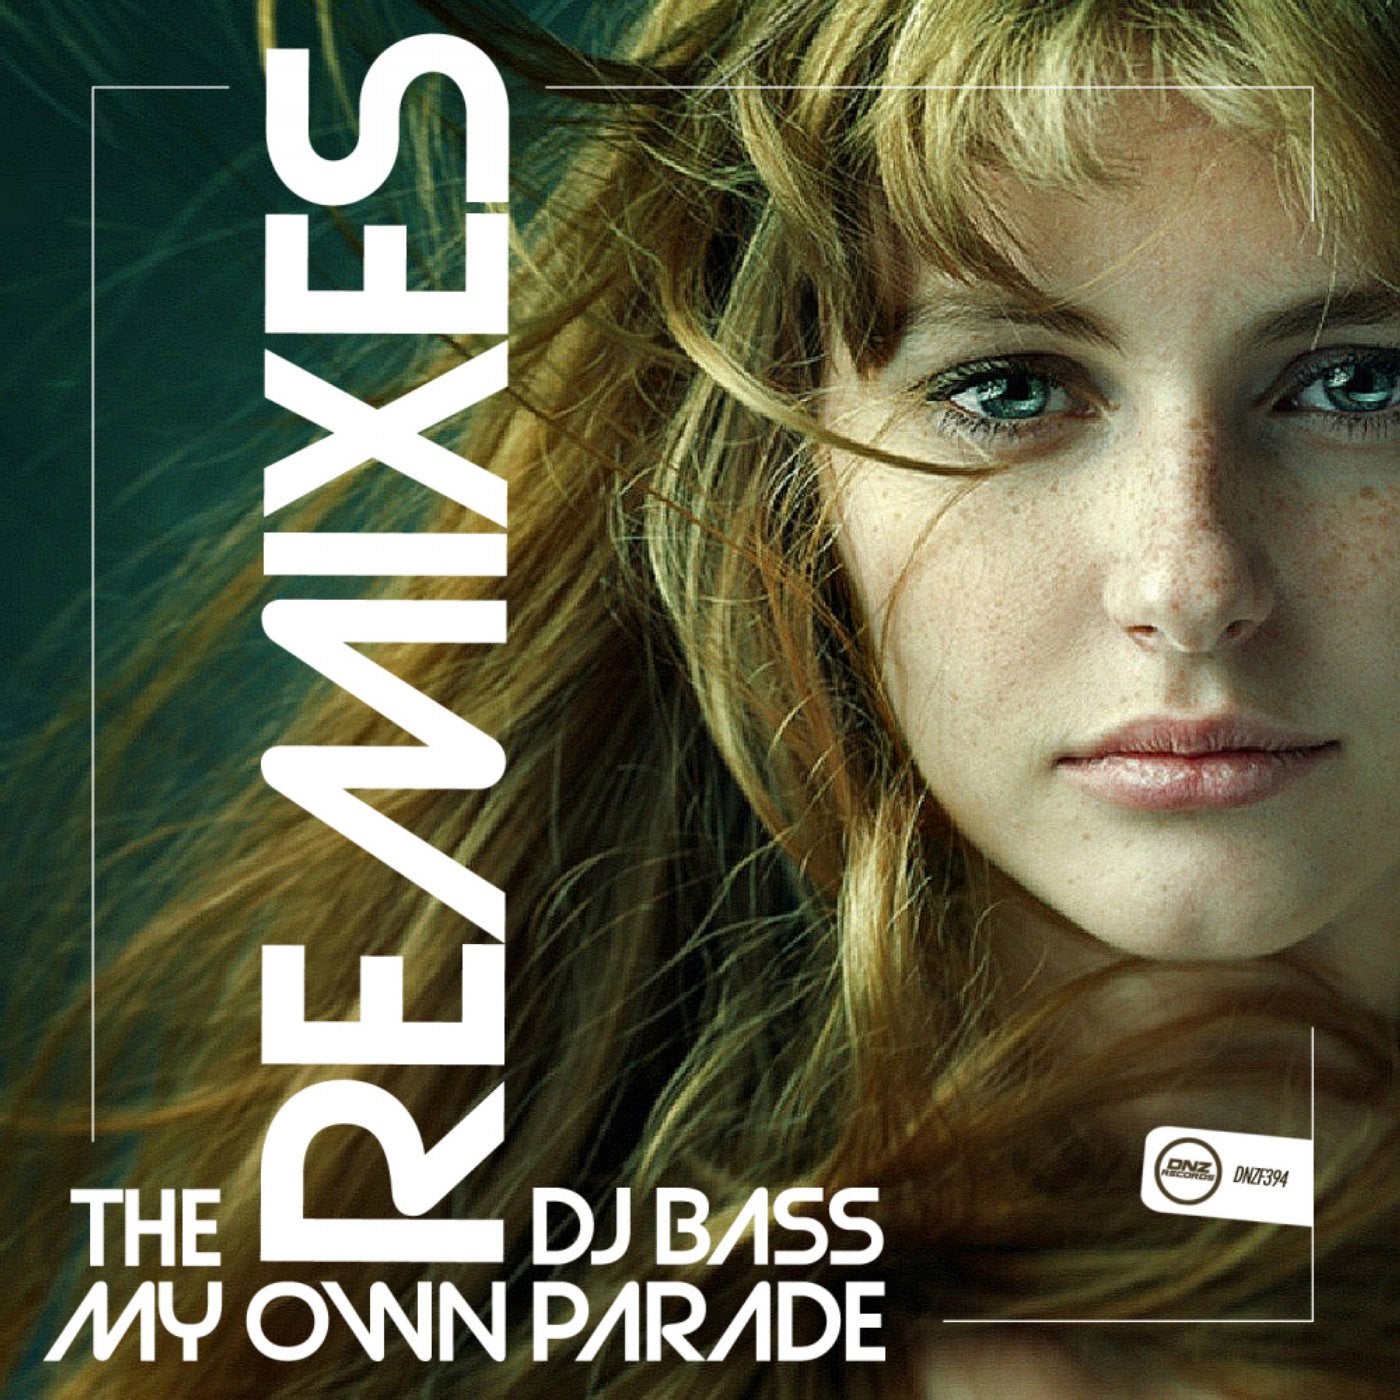 My Own Parade (The Remixes)